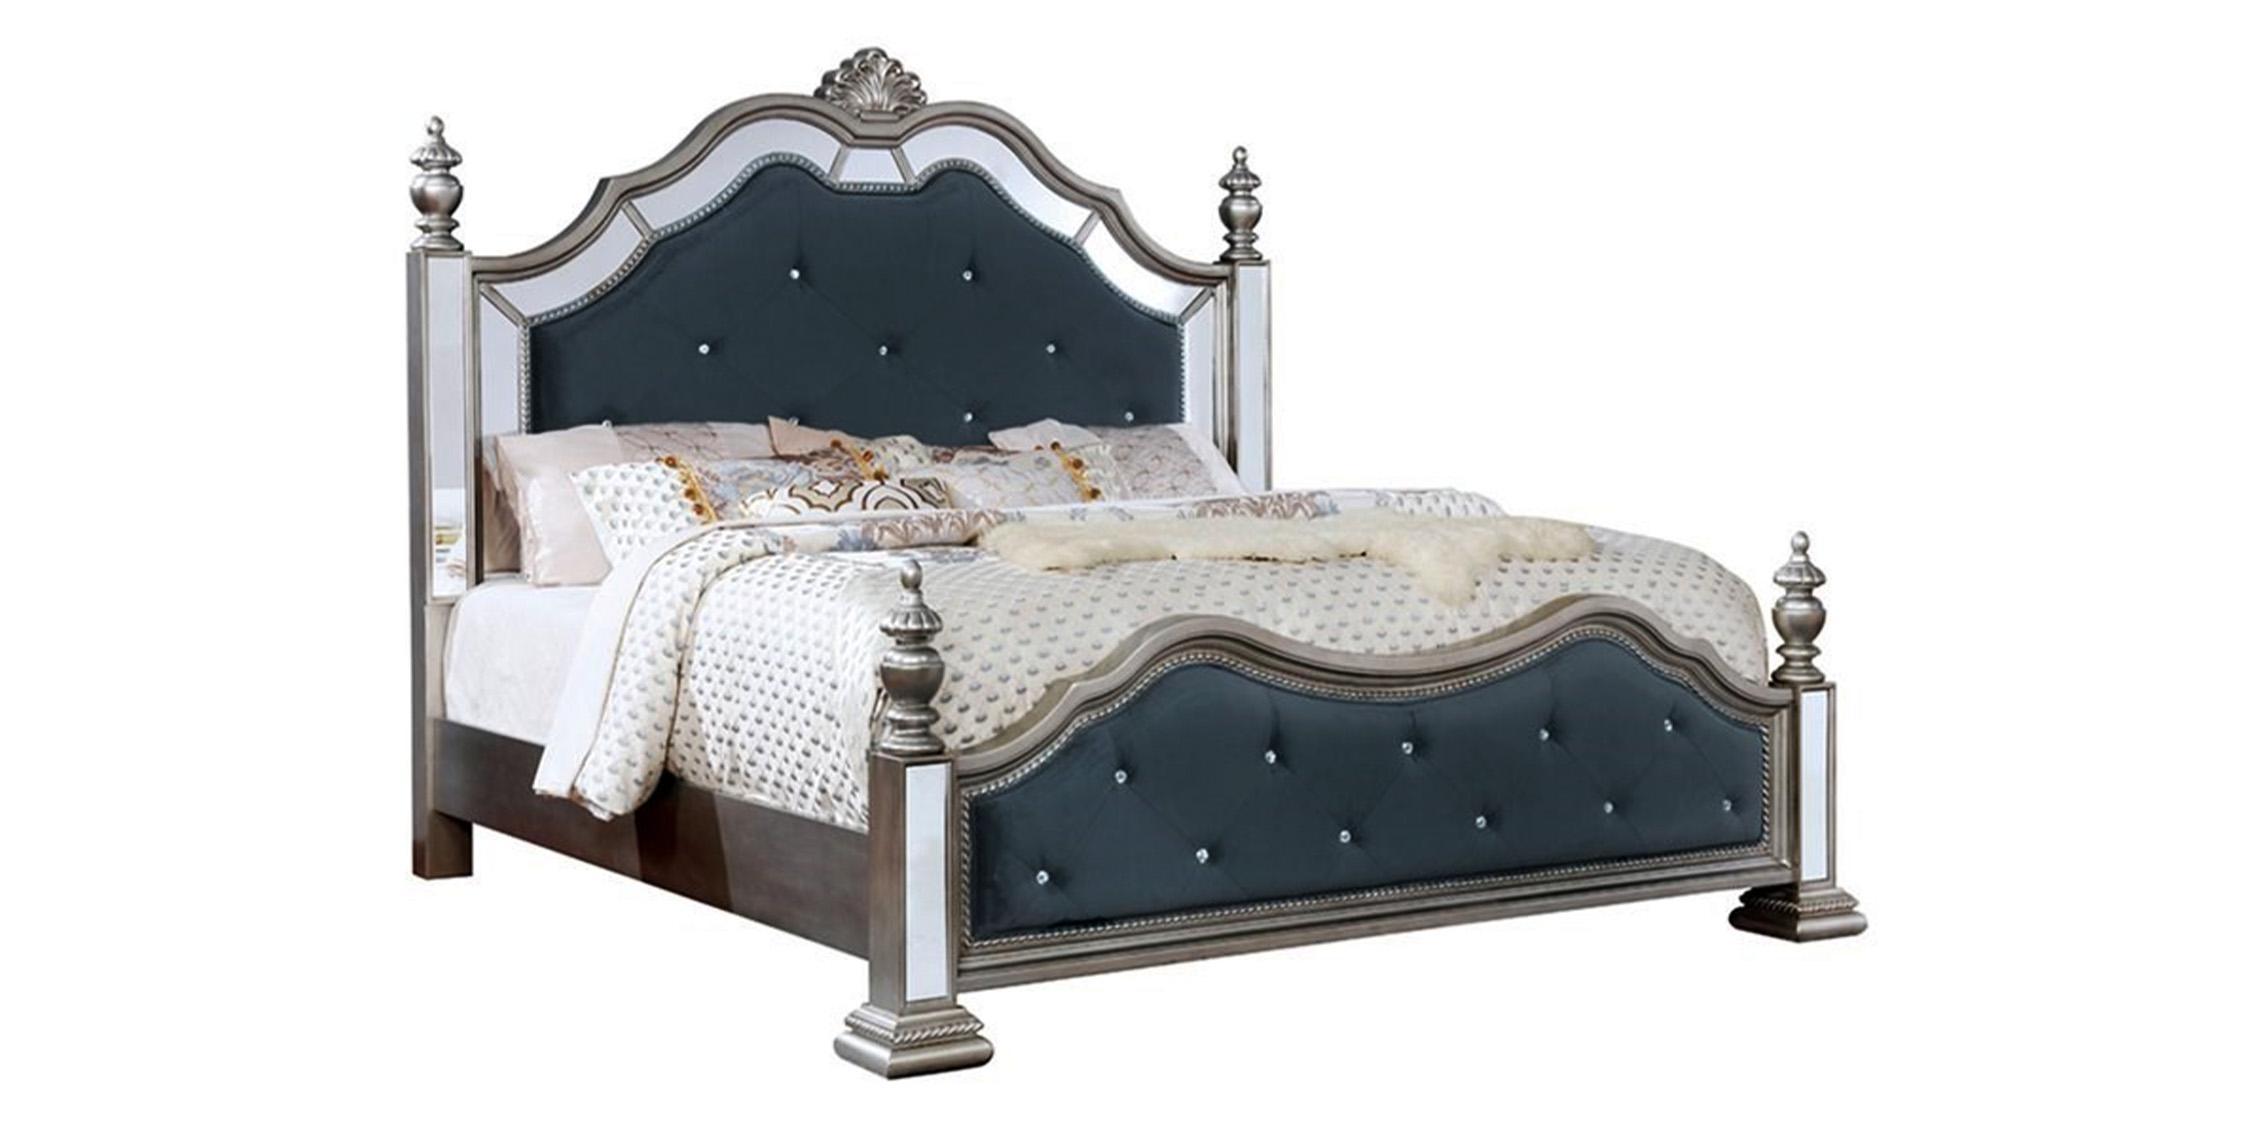 Classic, Traditional Poster Bed B1722 B1722-K in Antique White, Silver Fabric